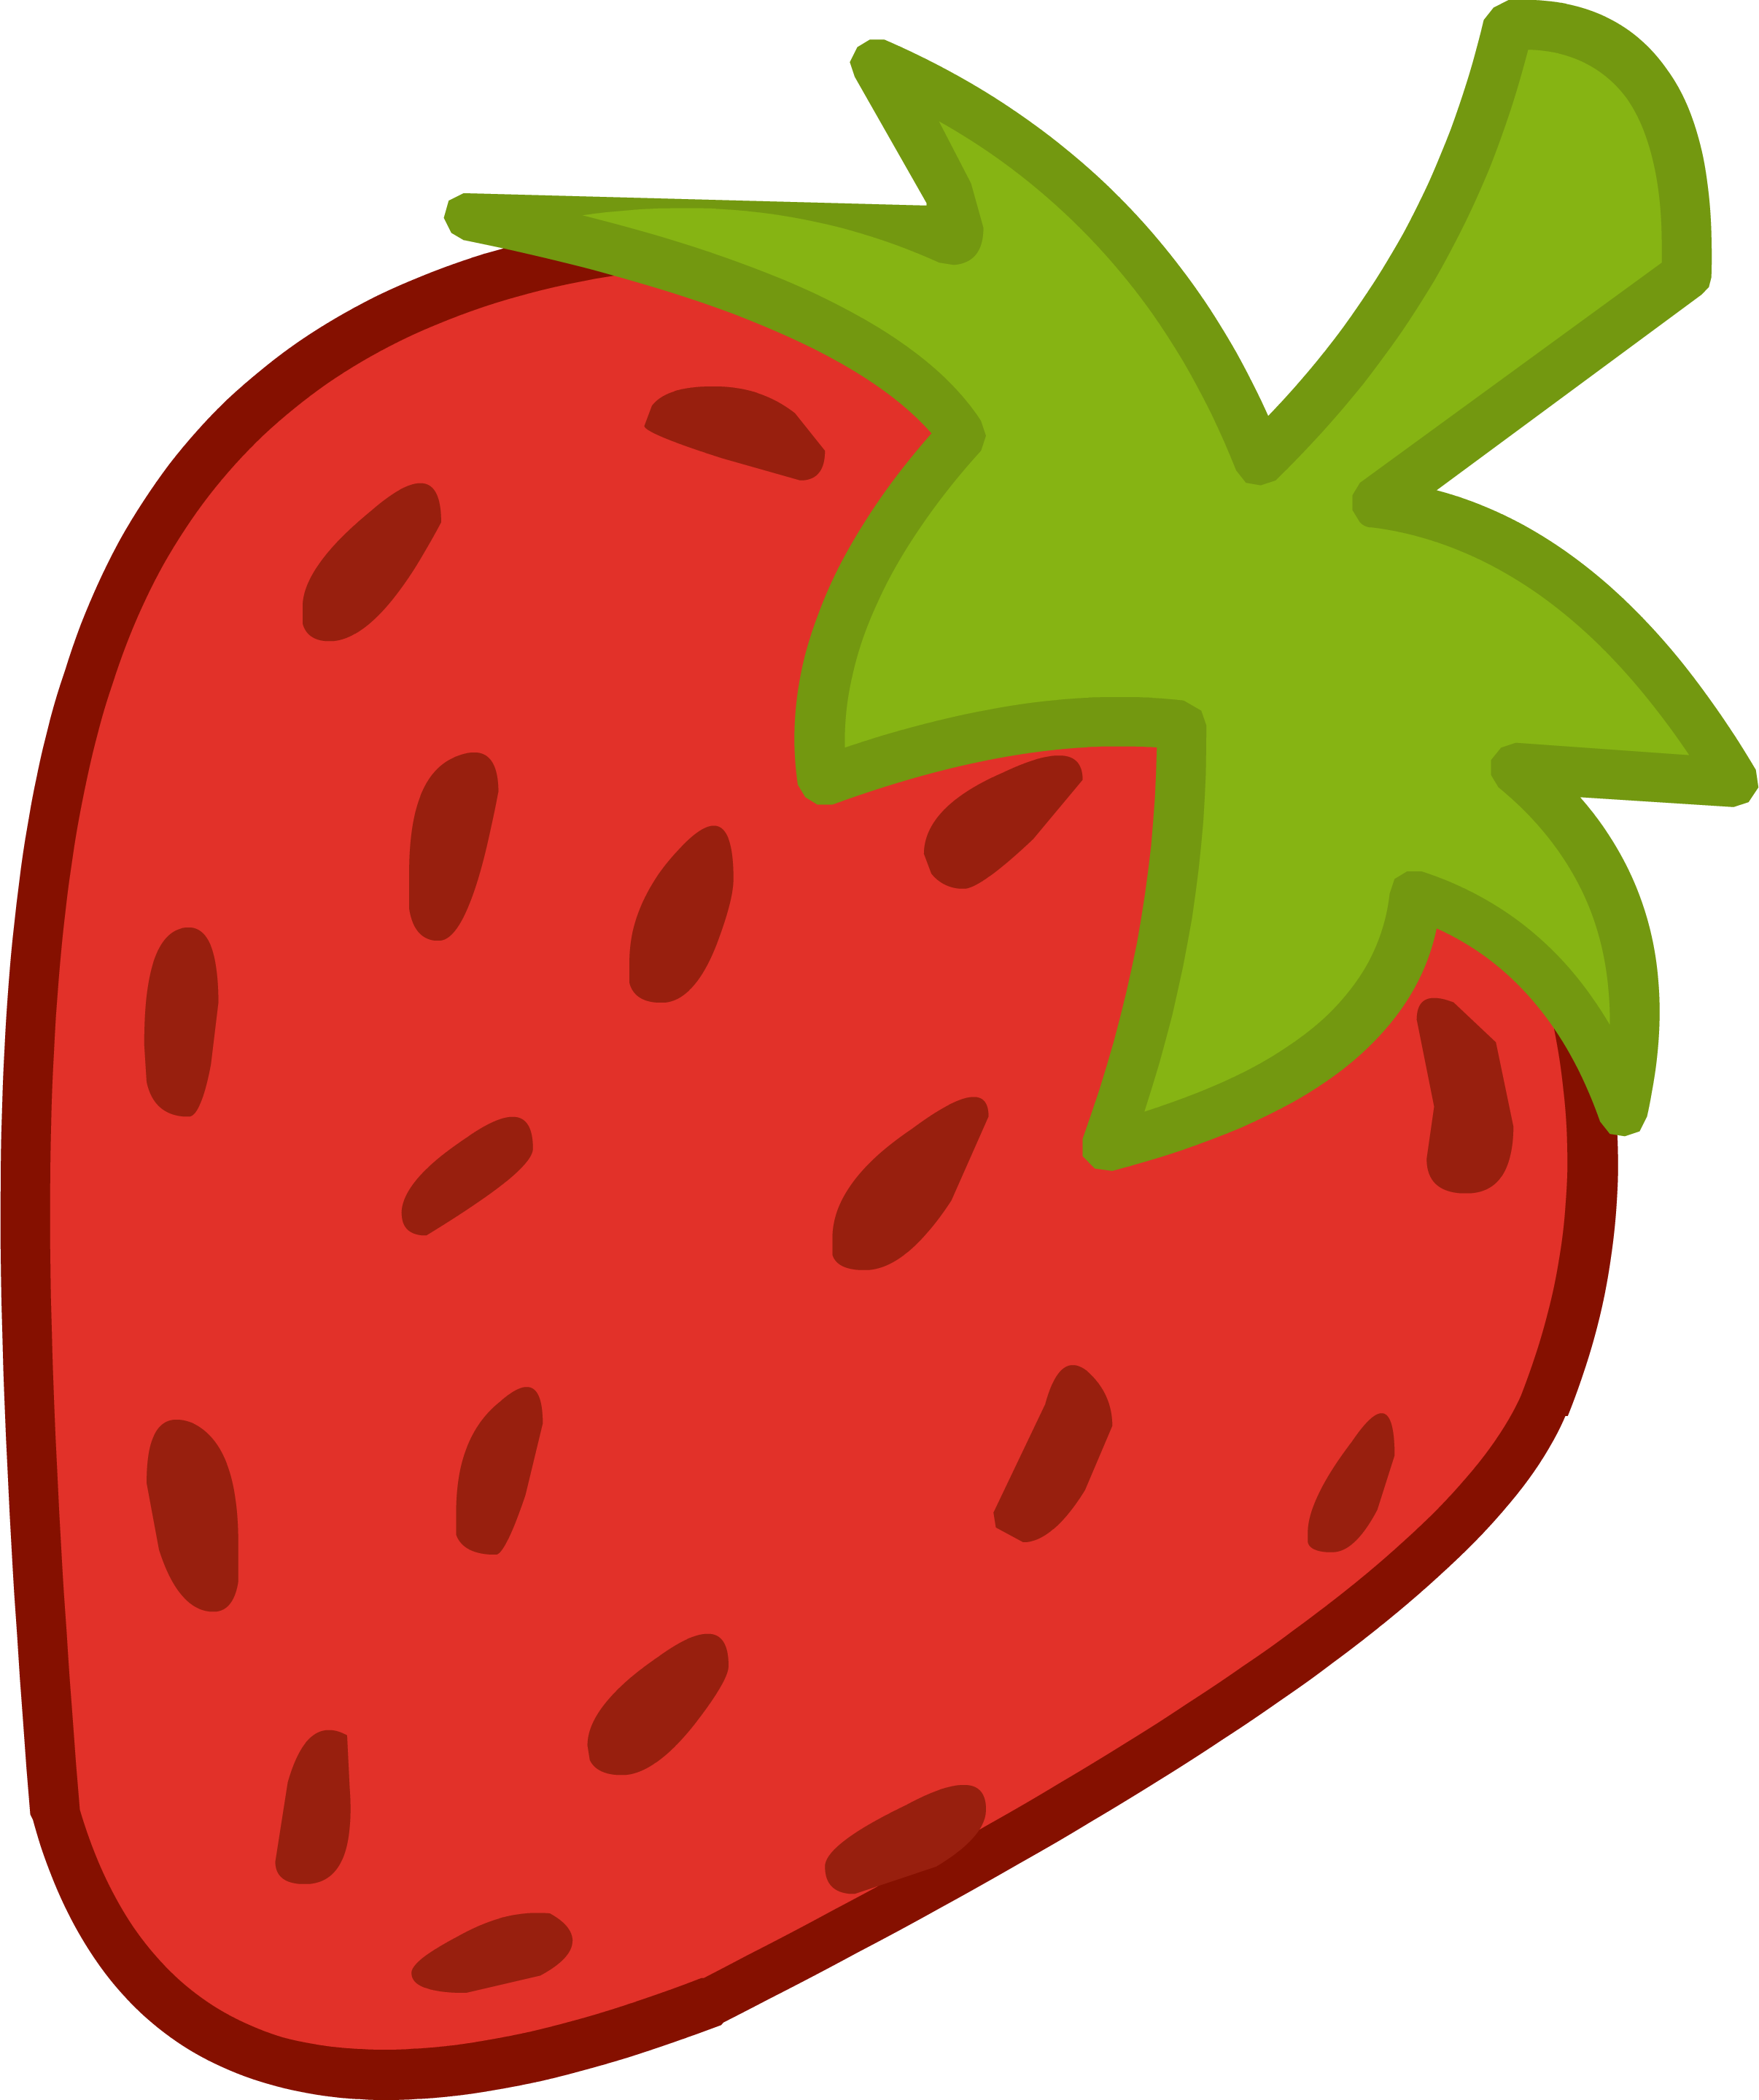 Cute Strawberry PNG Free Download